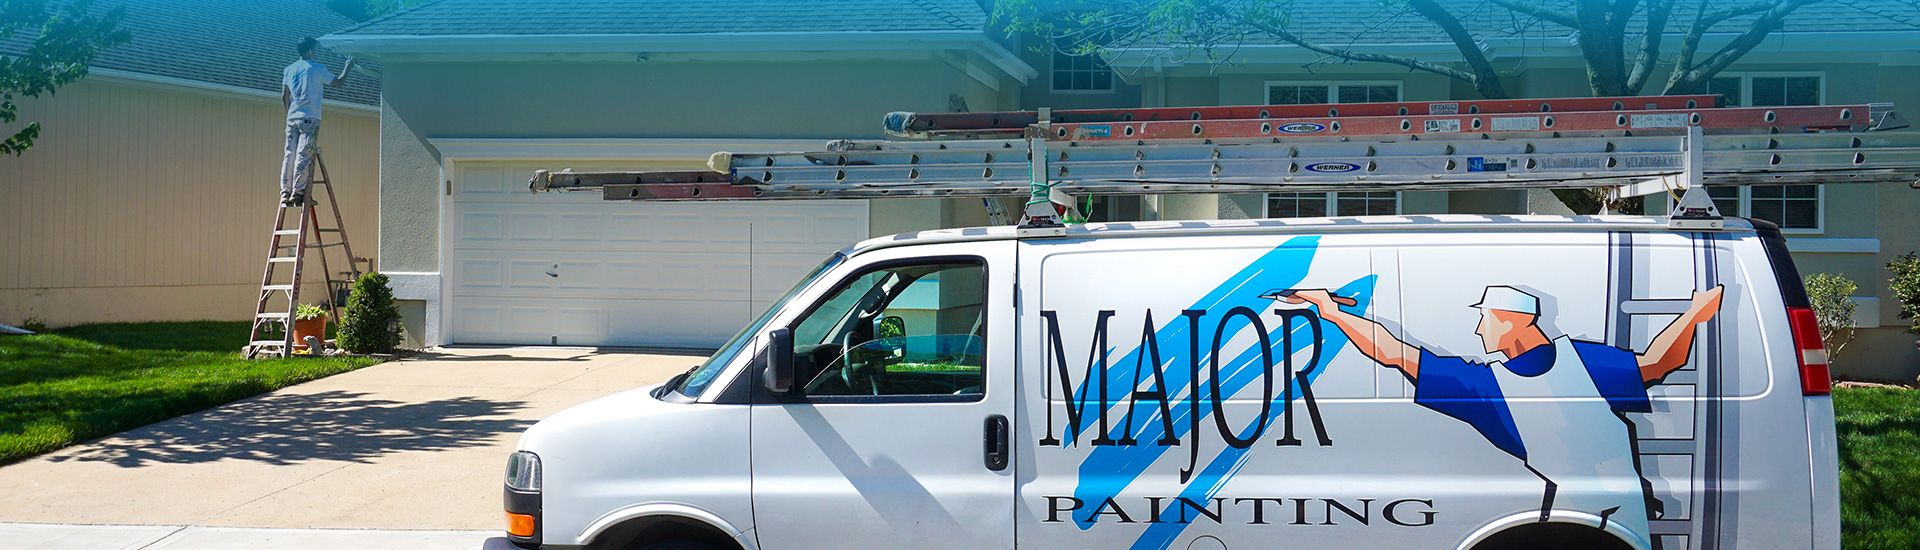 major painting van at house painting project in Lee's Summit, MO